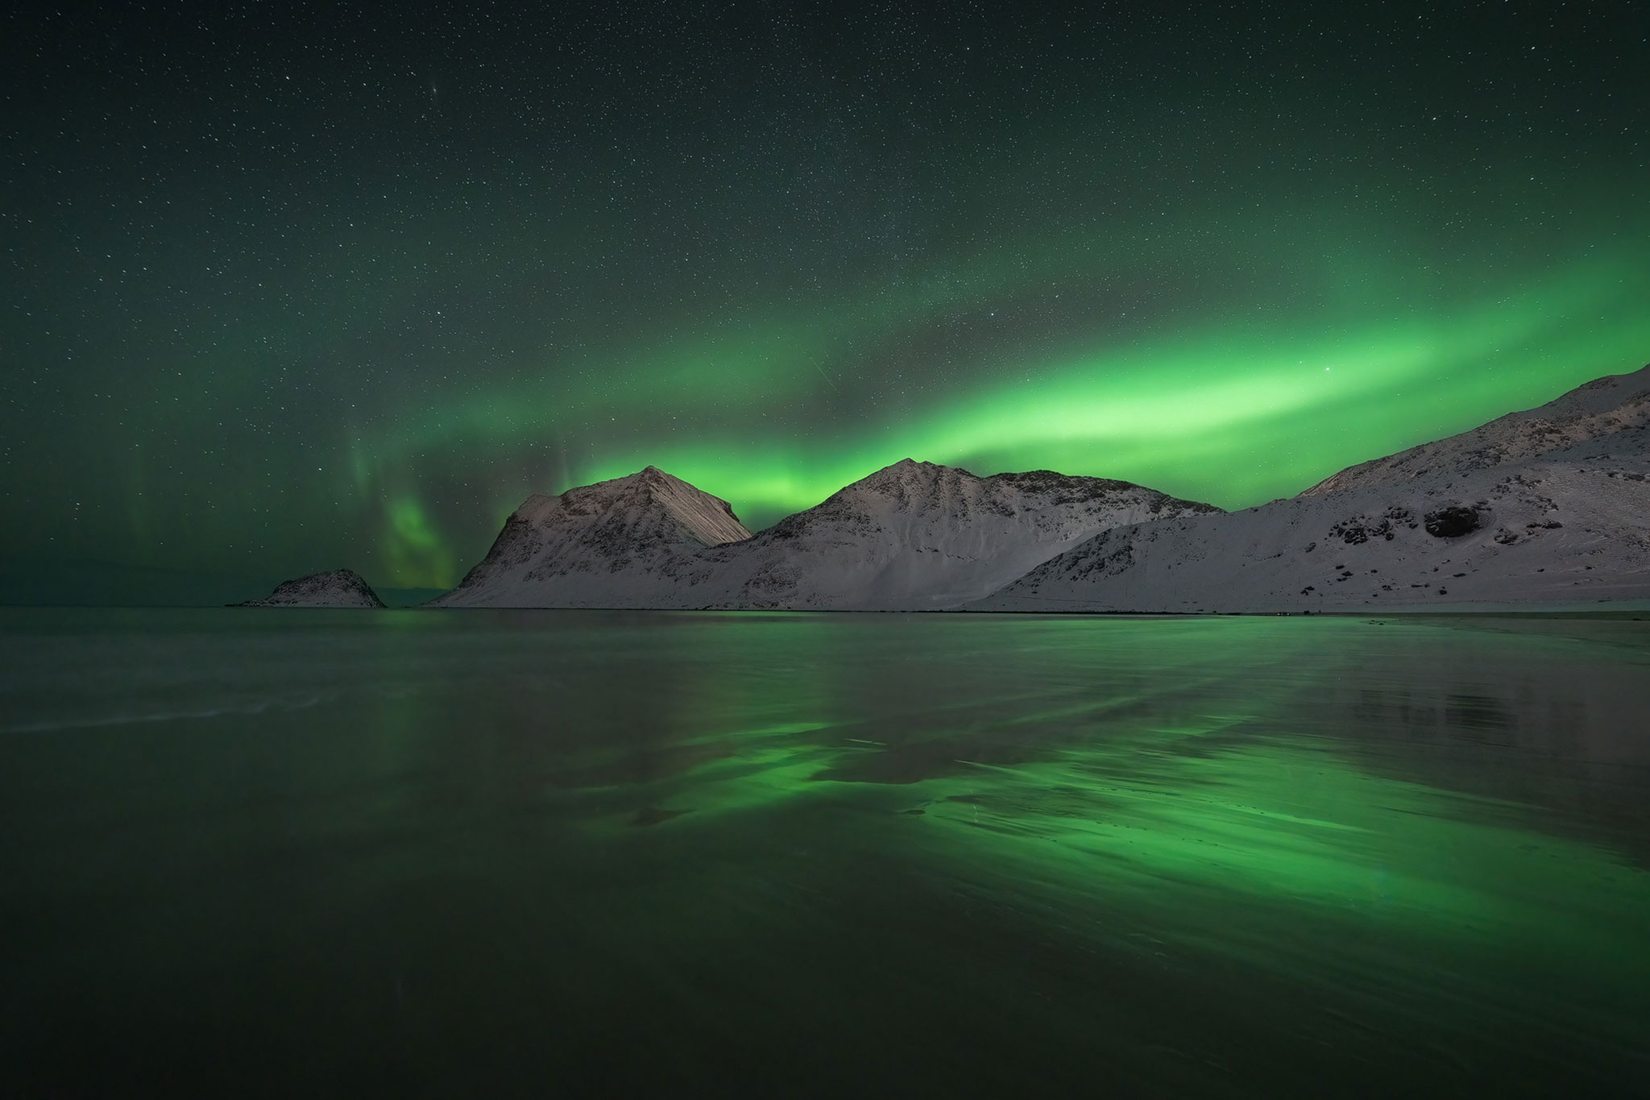 How to retouch & denoise a Northern Lights Photo